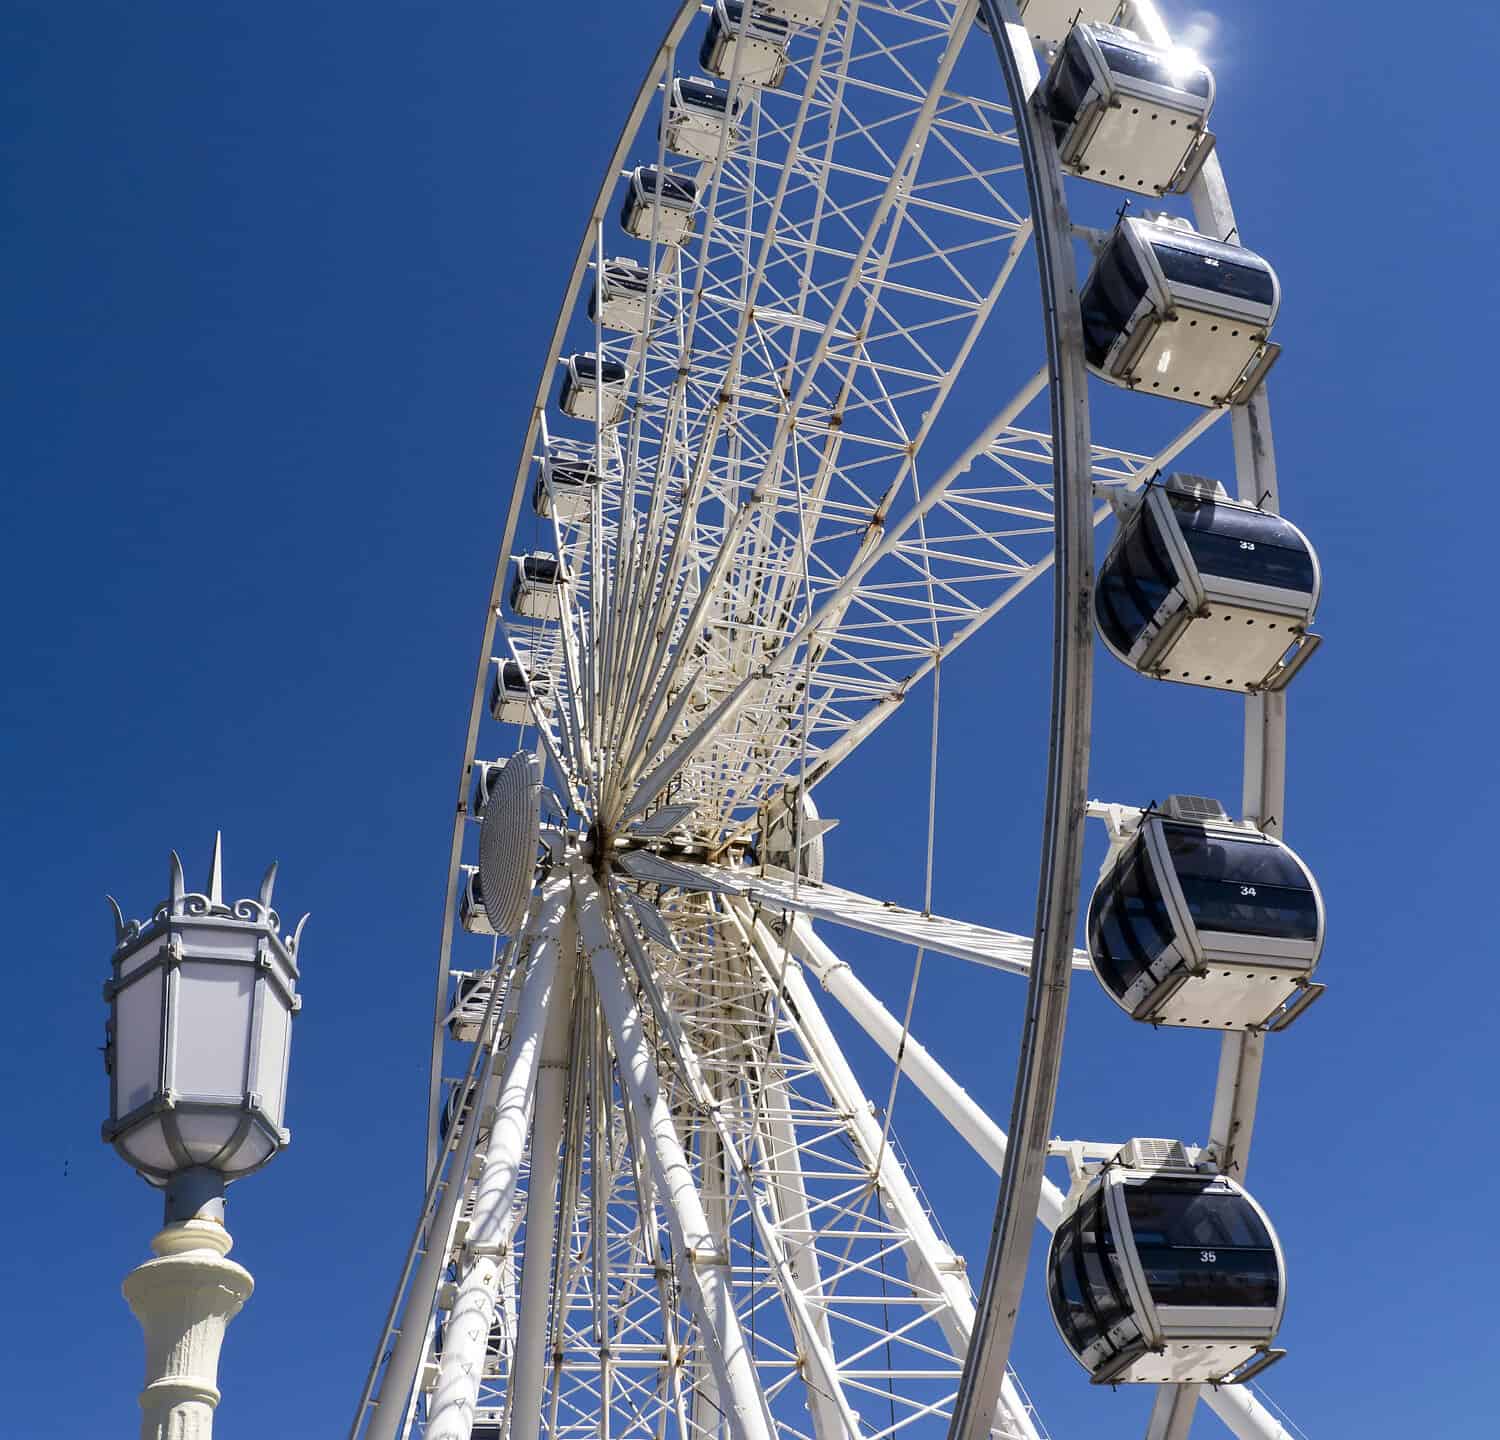 Brighton Eye Ferris Wheel; silhouetted against deep blue sky with street lamp in foreground